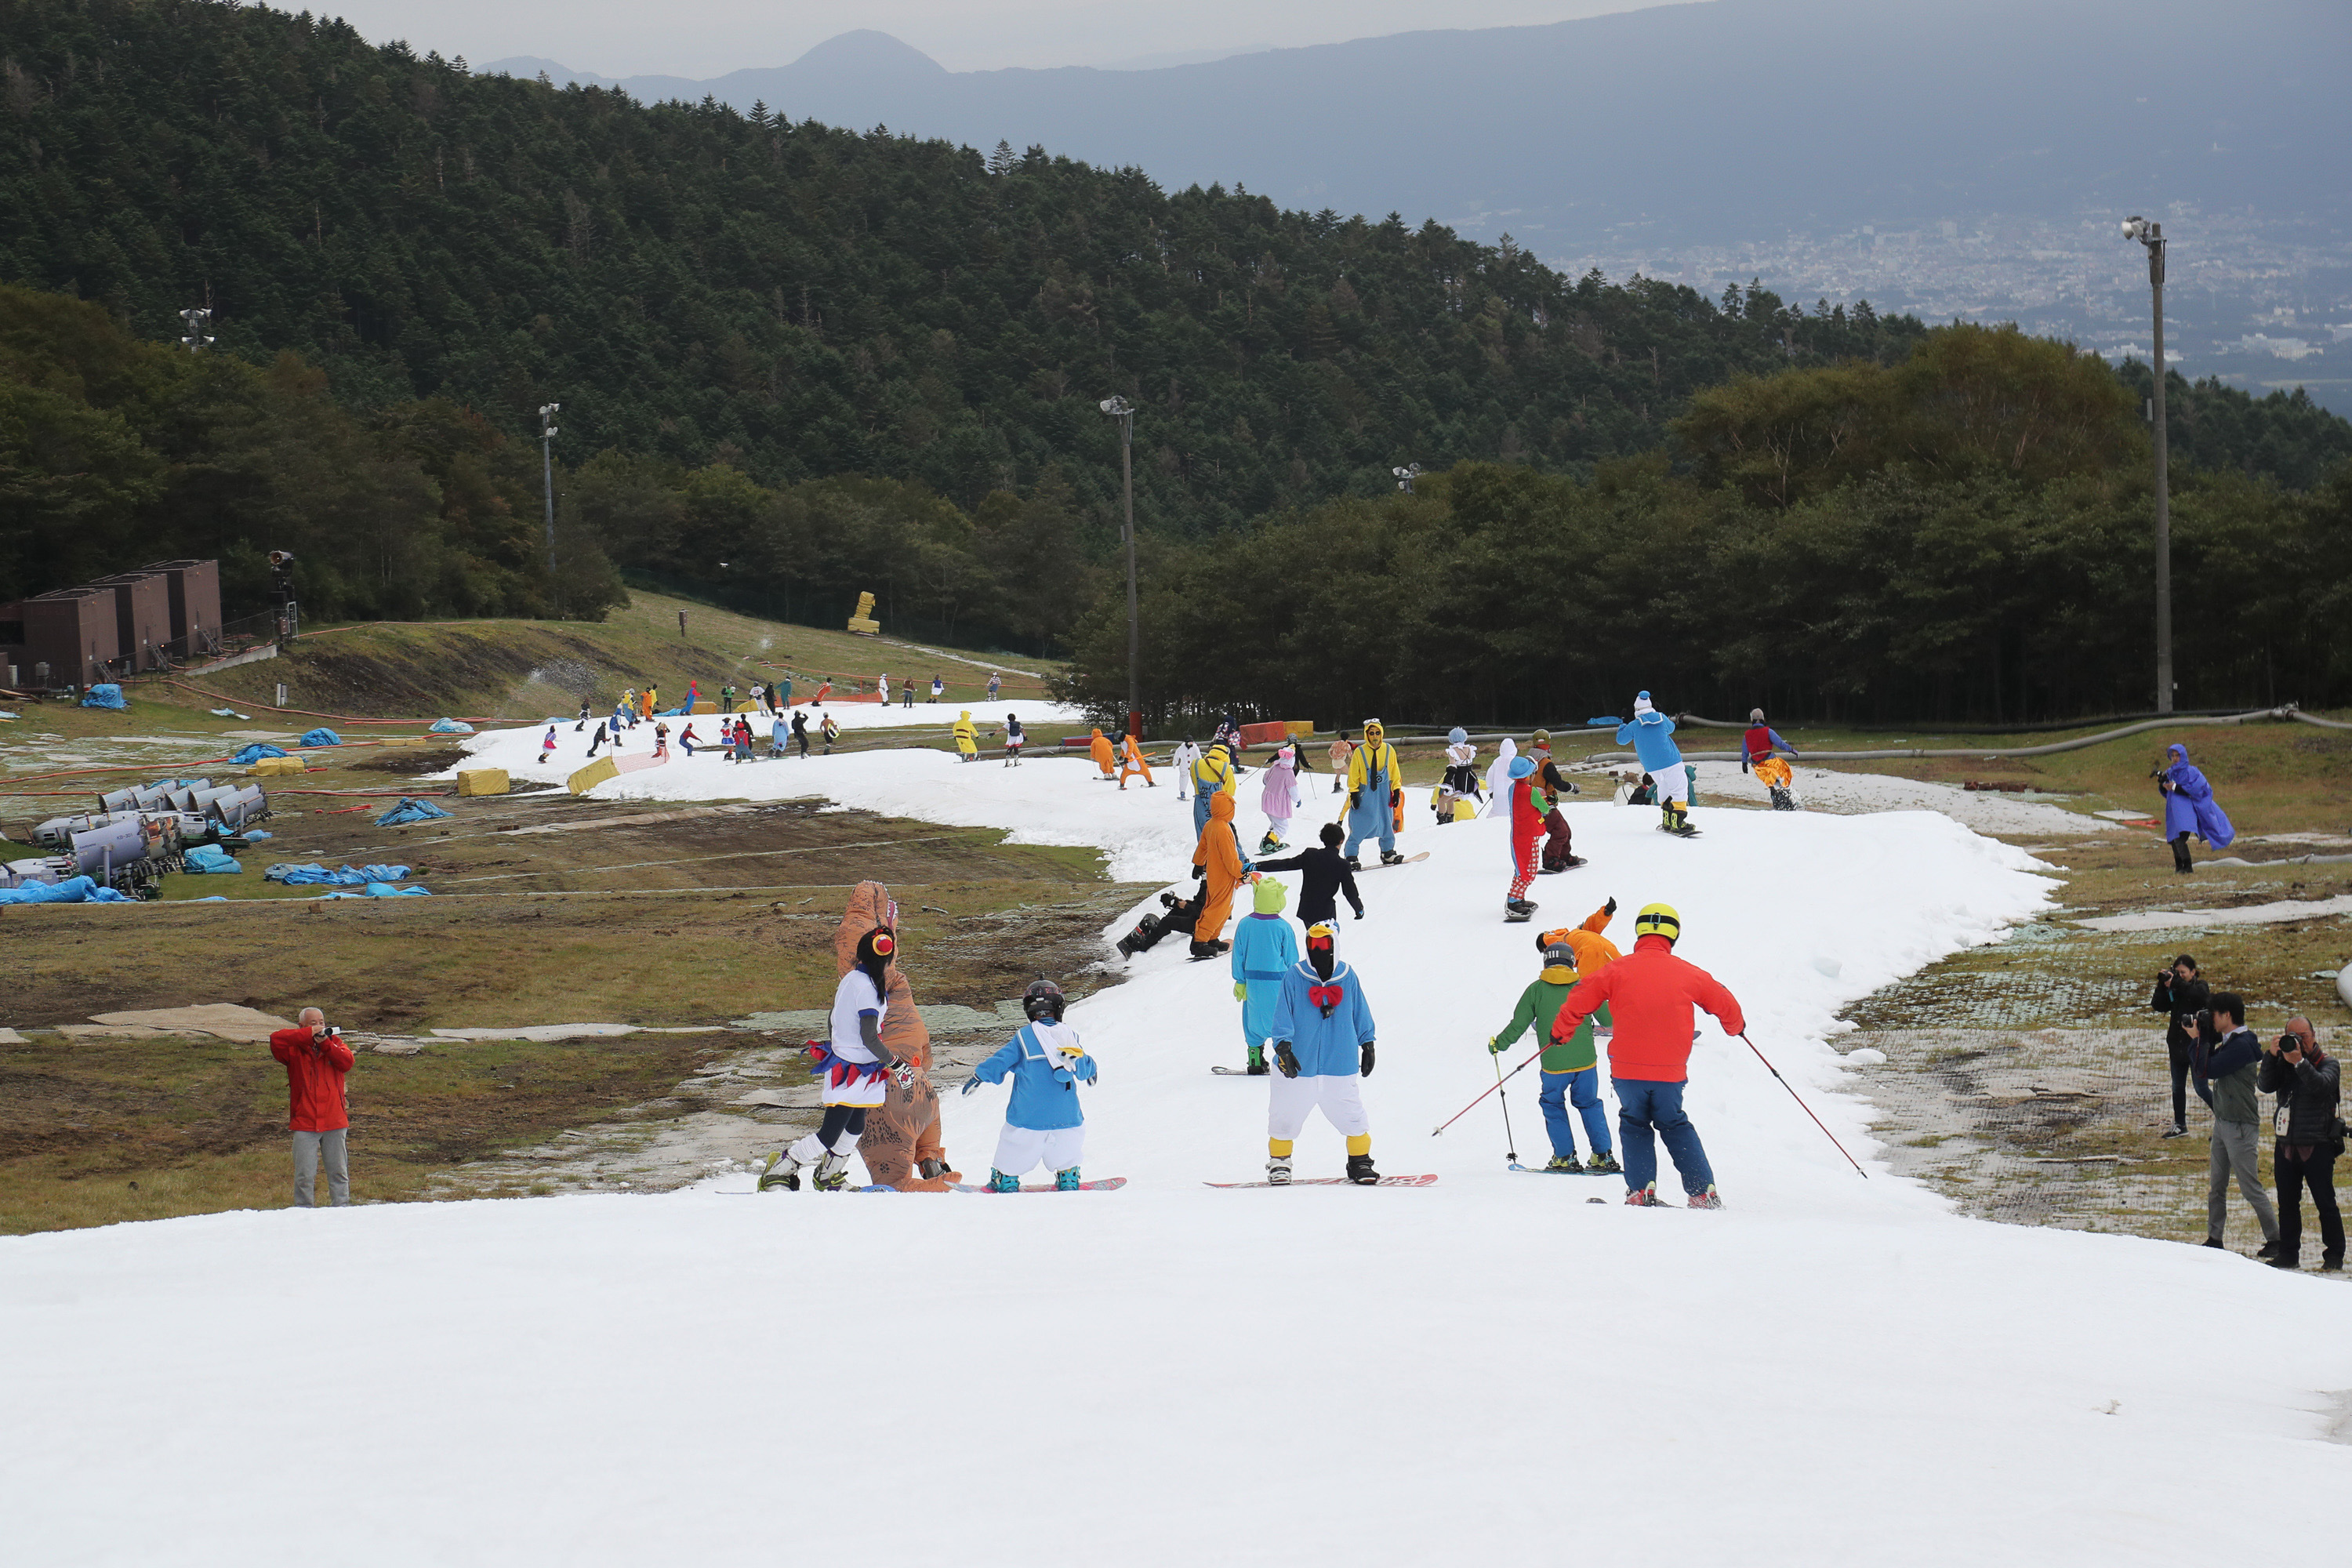 A course with a total length of 1,000 m and a width of 8 to 12 m is completed with snow made with ICS (Ice Crash System).